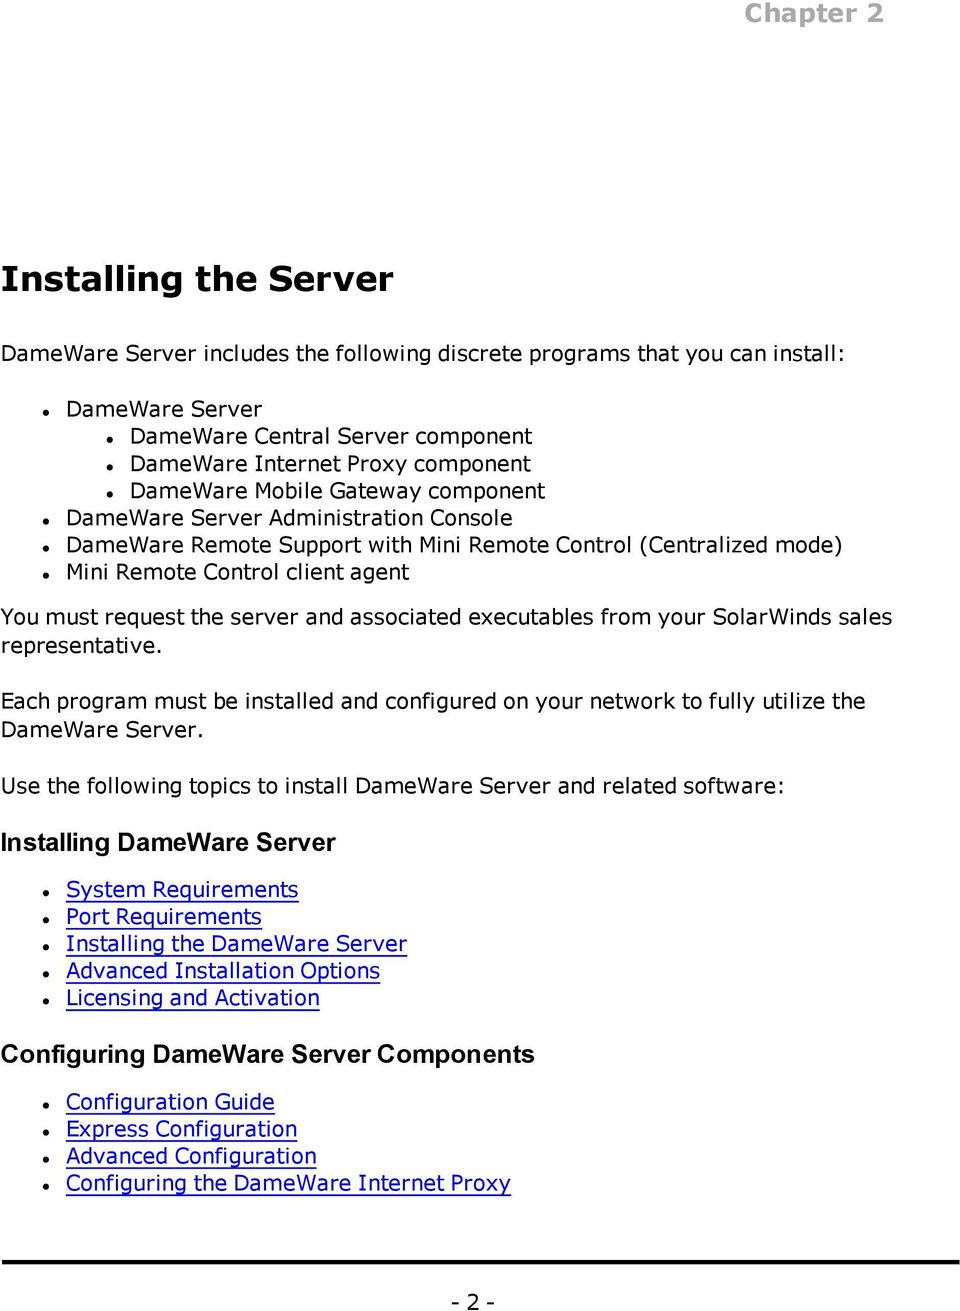 server and associated executables from your SolarWinds sales representative. Each program must be installed and configured on your network to fully utilize the DameWare Server.